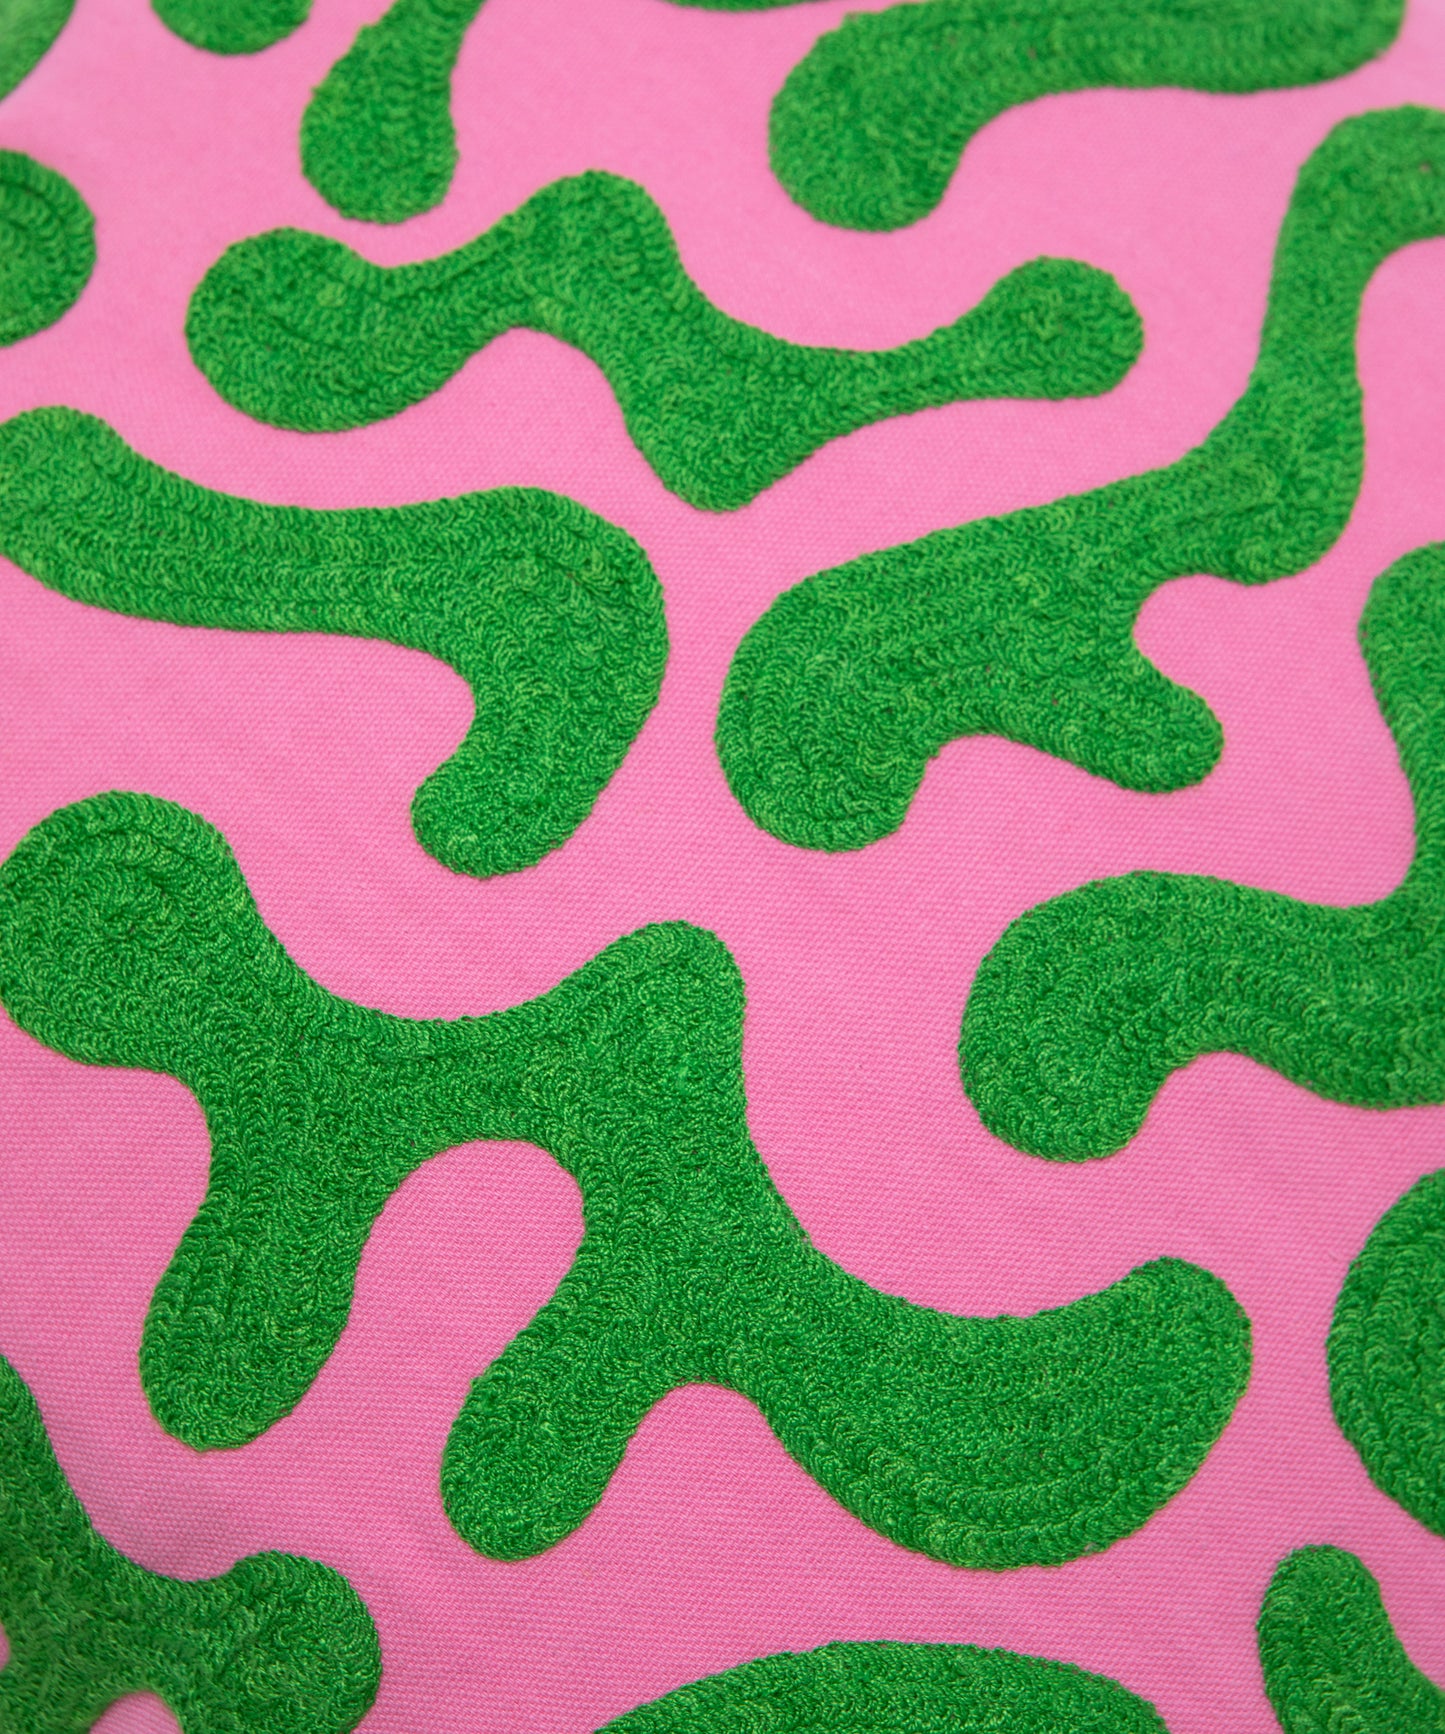 Close up detail of silly squiggle pillow cover showing the stitching in the green squiggle shapes on a pink background.